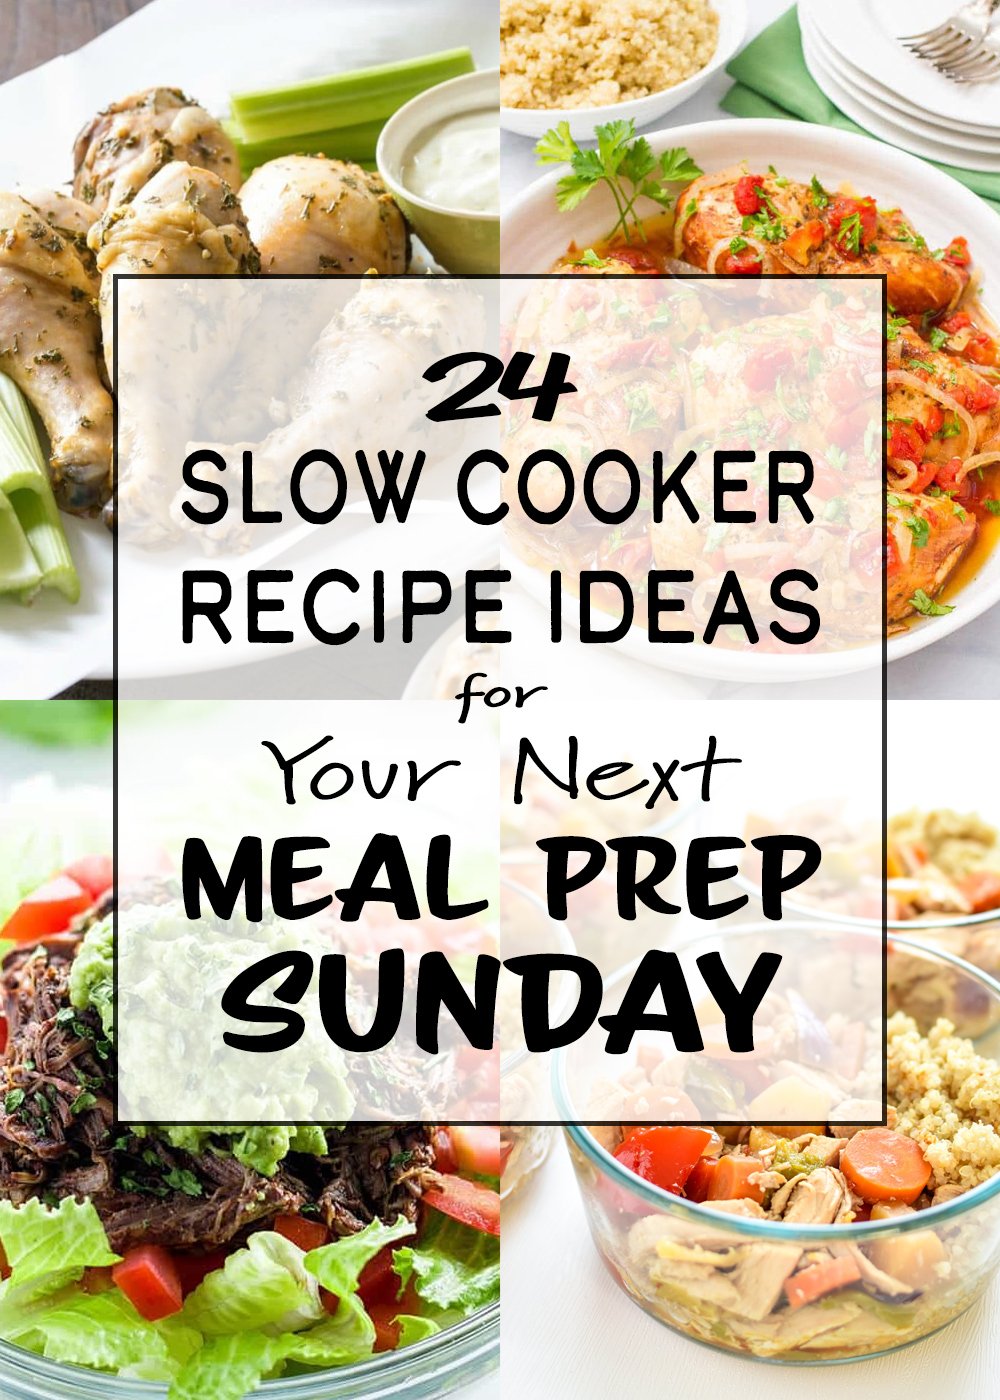 24 slow cooker recipe ideas for your next meal prep sunday